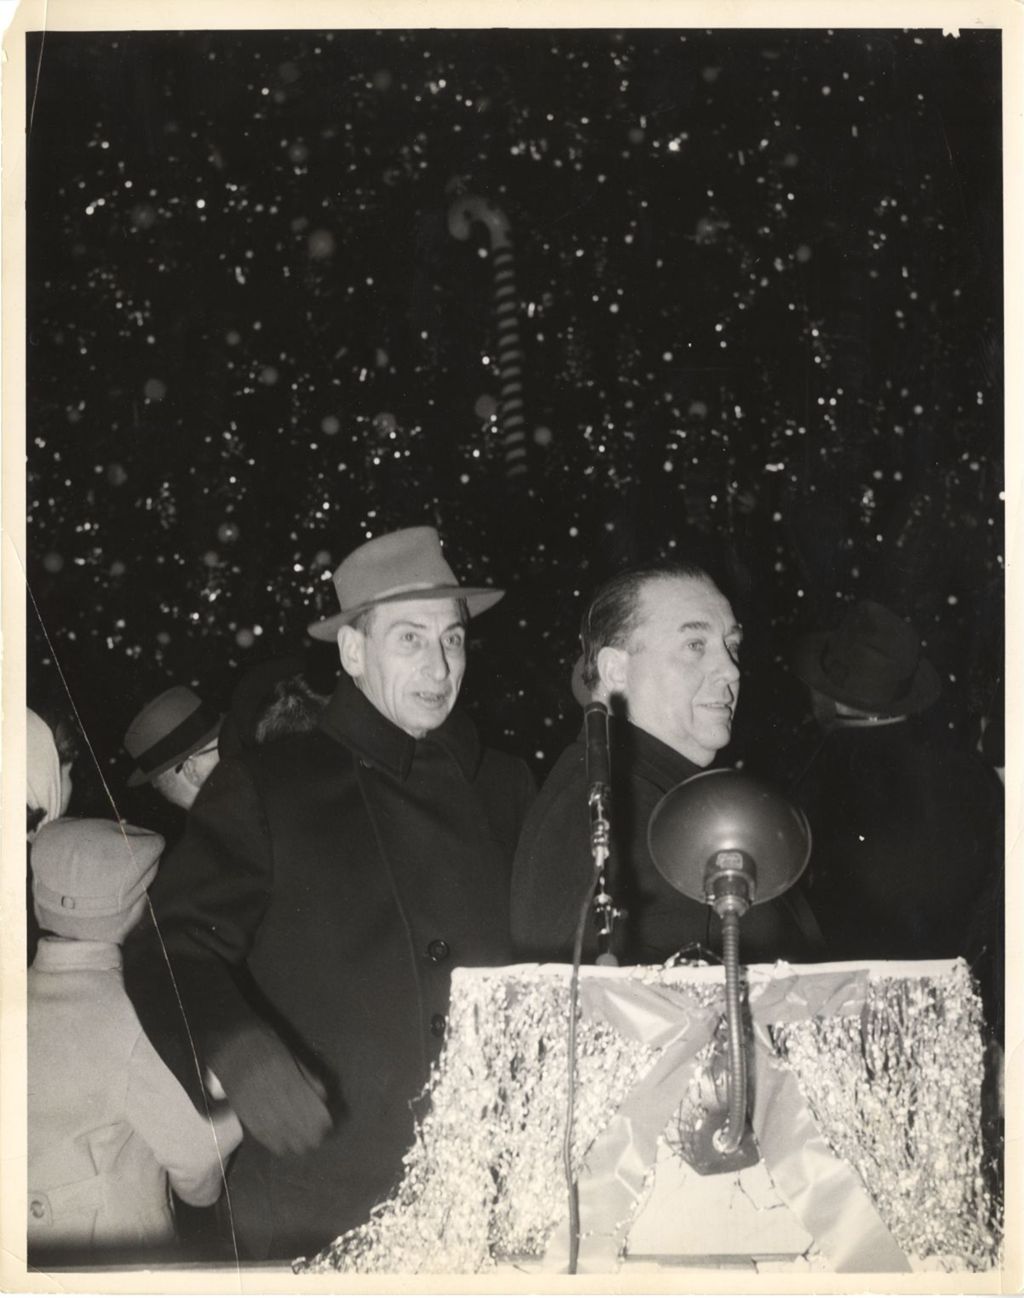 Richard J. Daley outdoors at a holiday event